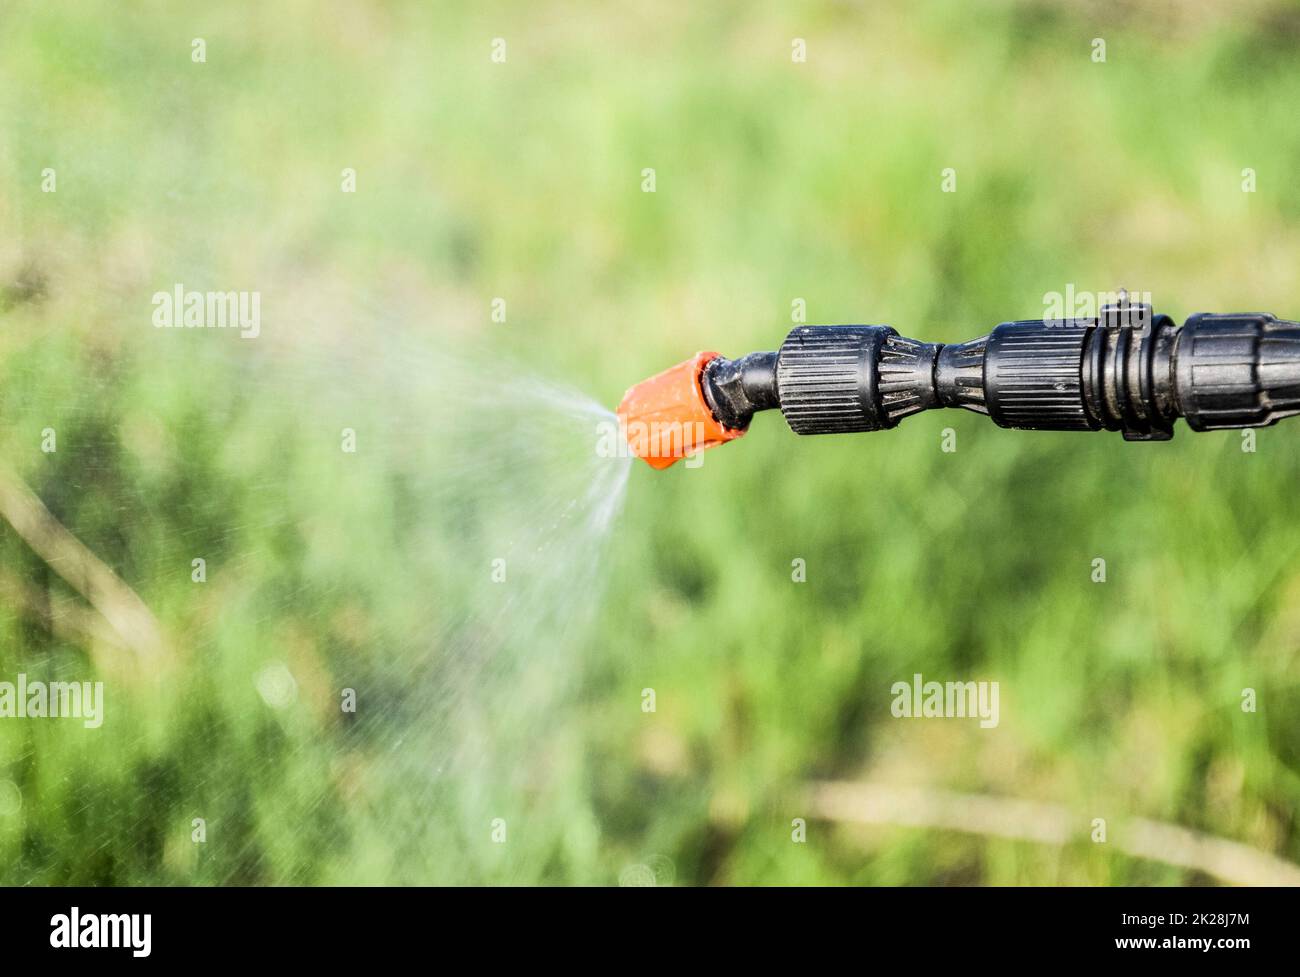 Spraying herbicide from the nozzle of the sprayer manual Stock Photo